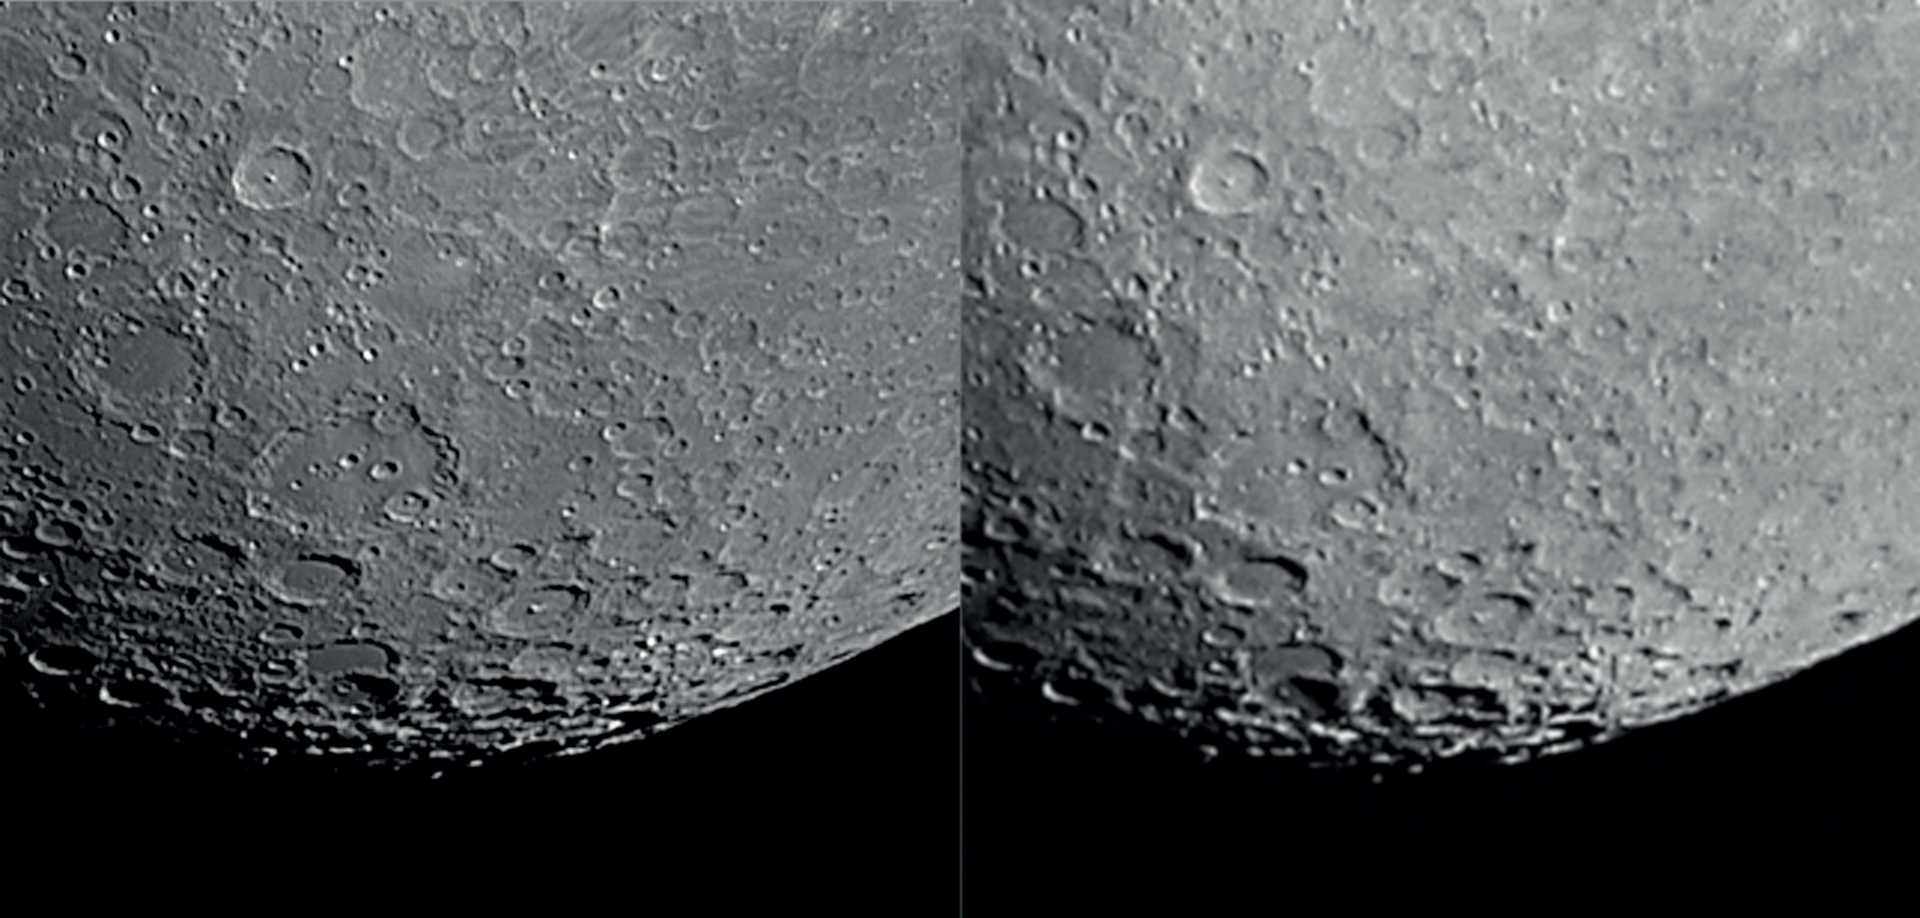 Capturing several hundred images with a CCD camera enables the creation of a composite picture using digital image processing, that is much more detailed than a single image. On the right you can see a single image taken using a refractor (130mm aperture at 1,000mm focal length). On the left, a composite picture created from between 250 and 1,000 individual images. U. Dittler